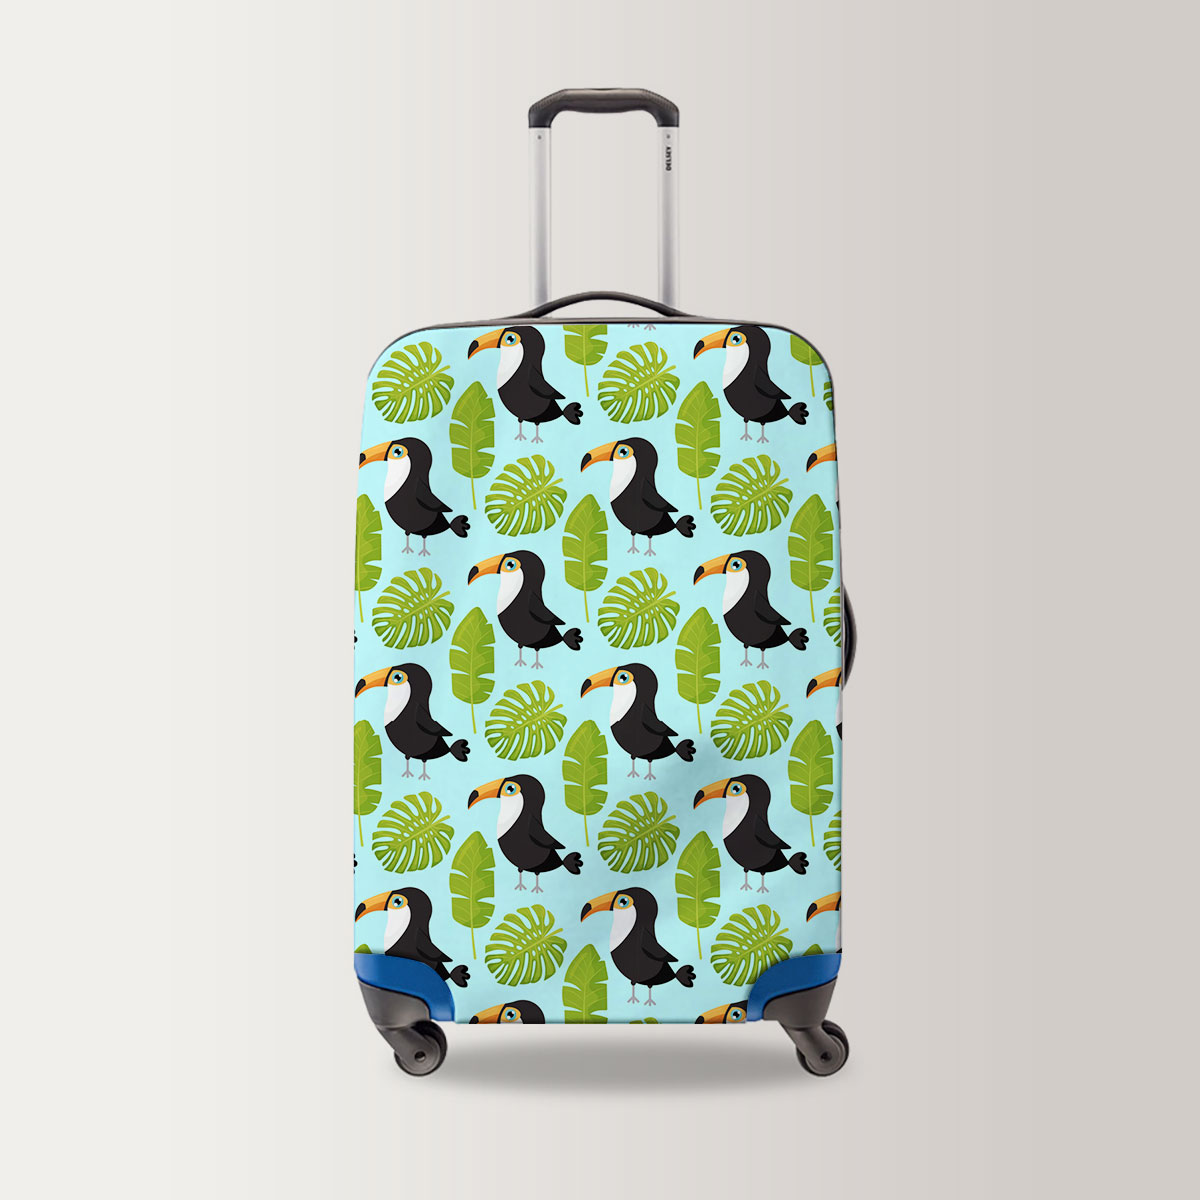 Coon Green Leaf Toucan Luggage Bag